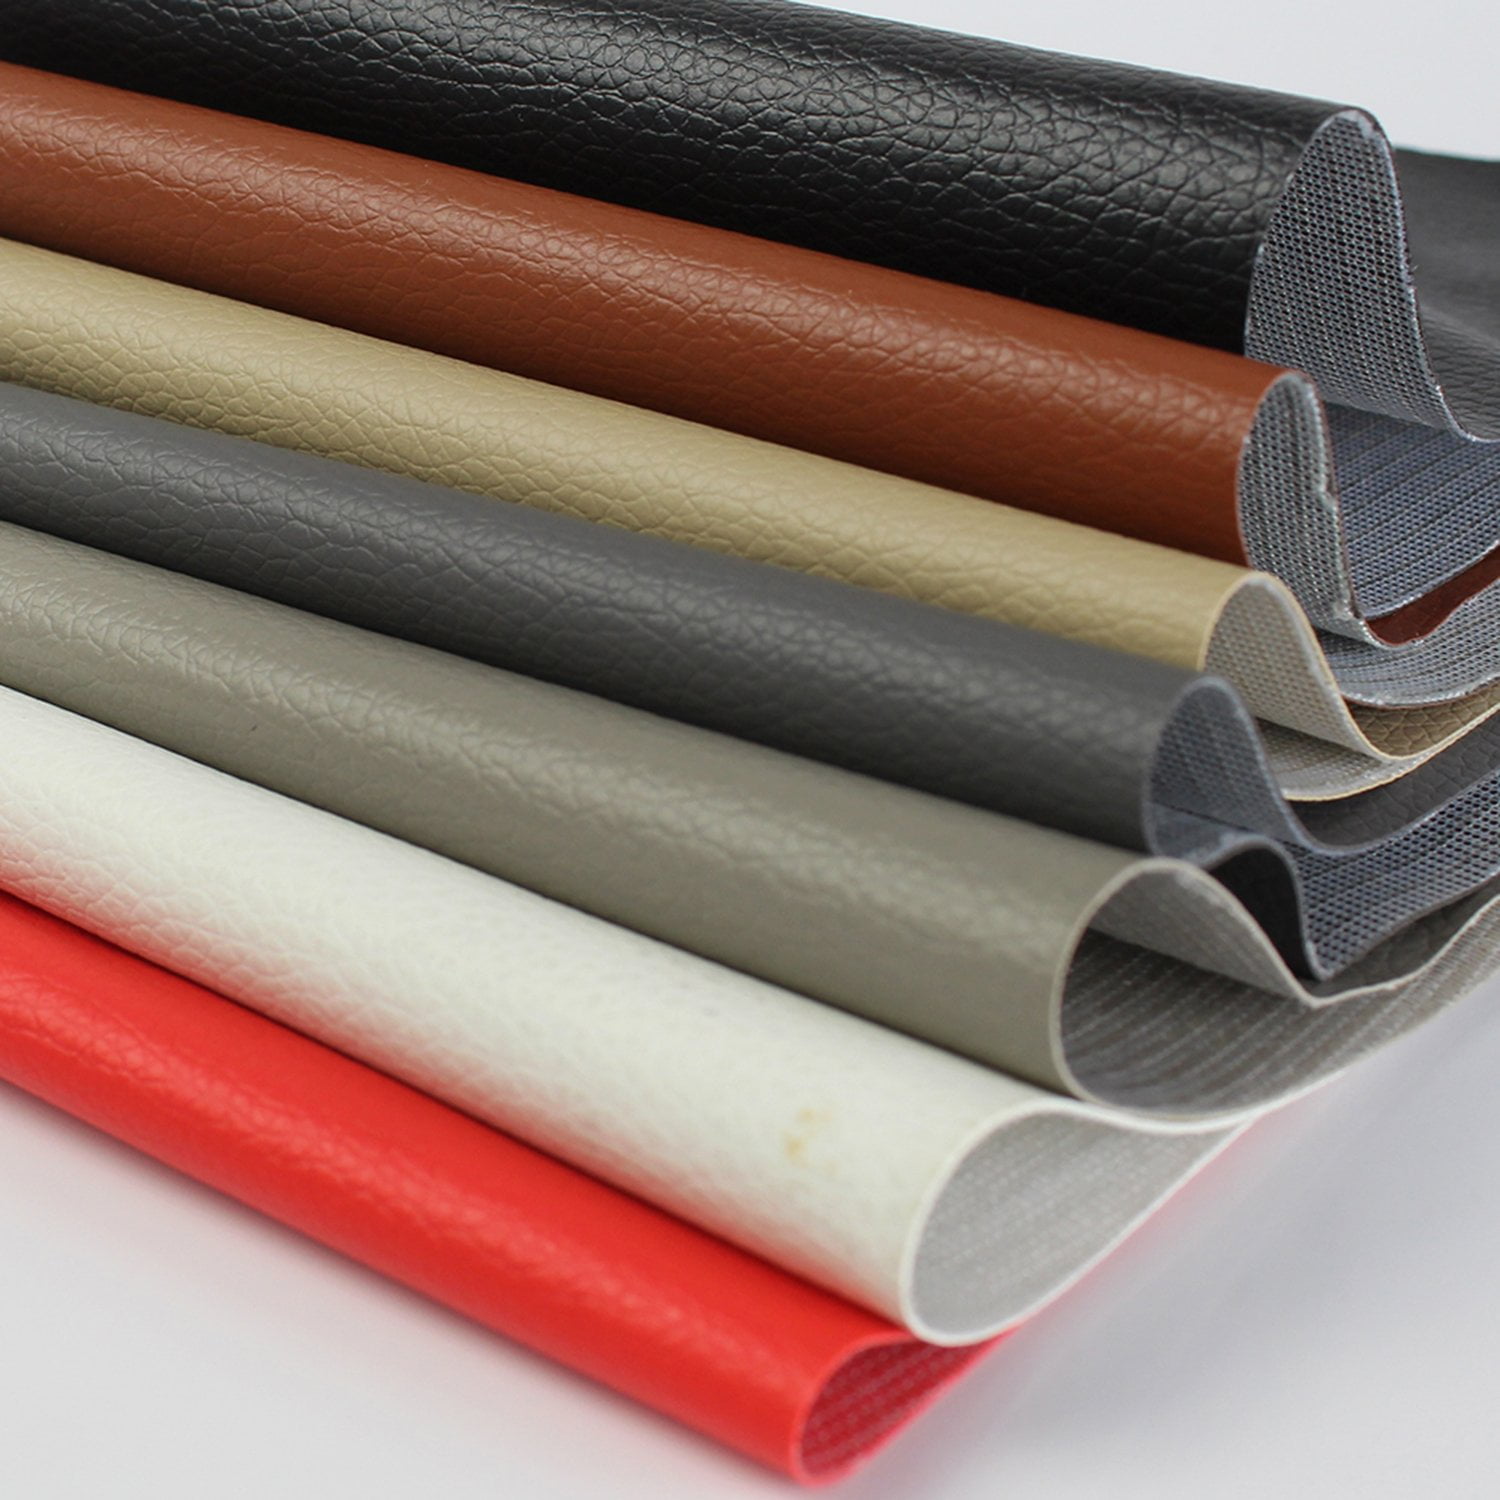 MARINE VINYL Leatherette Fabric UV Boats Leatherette Material Upholstery Covers 